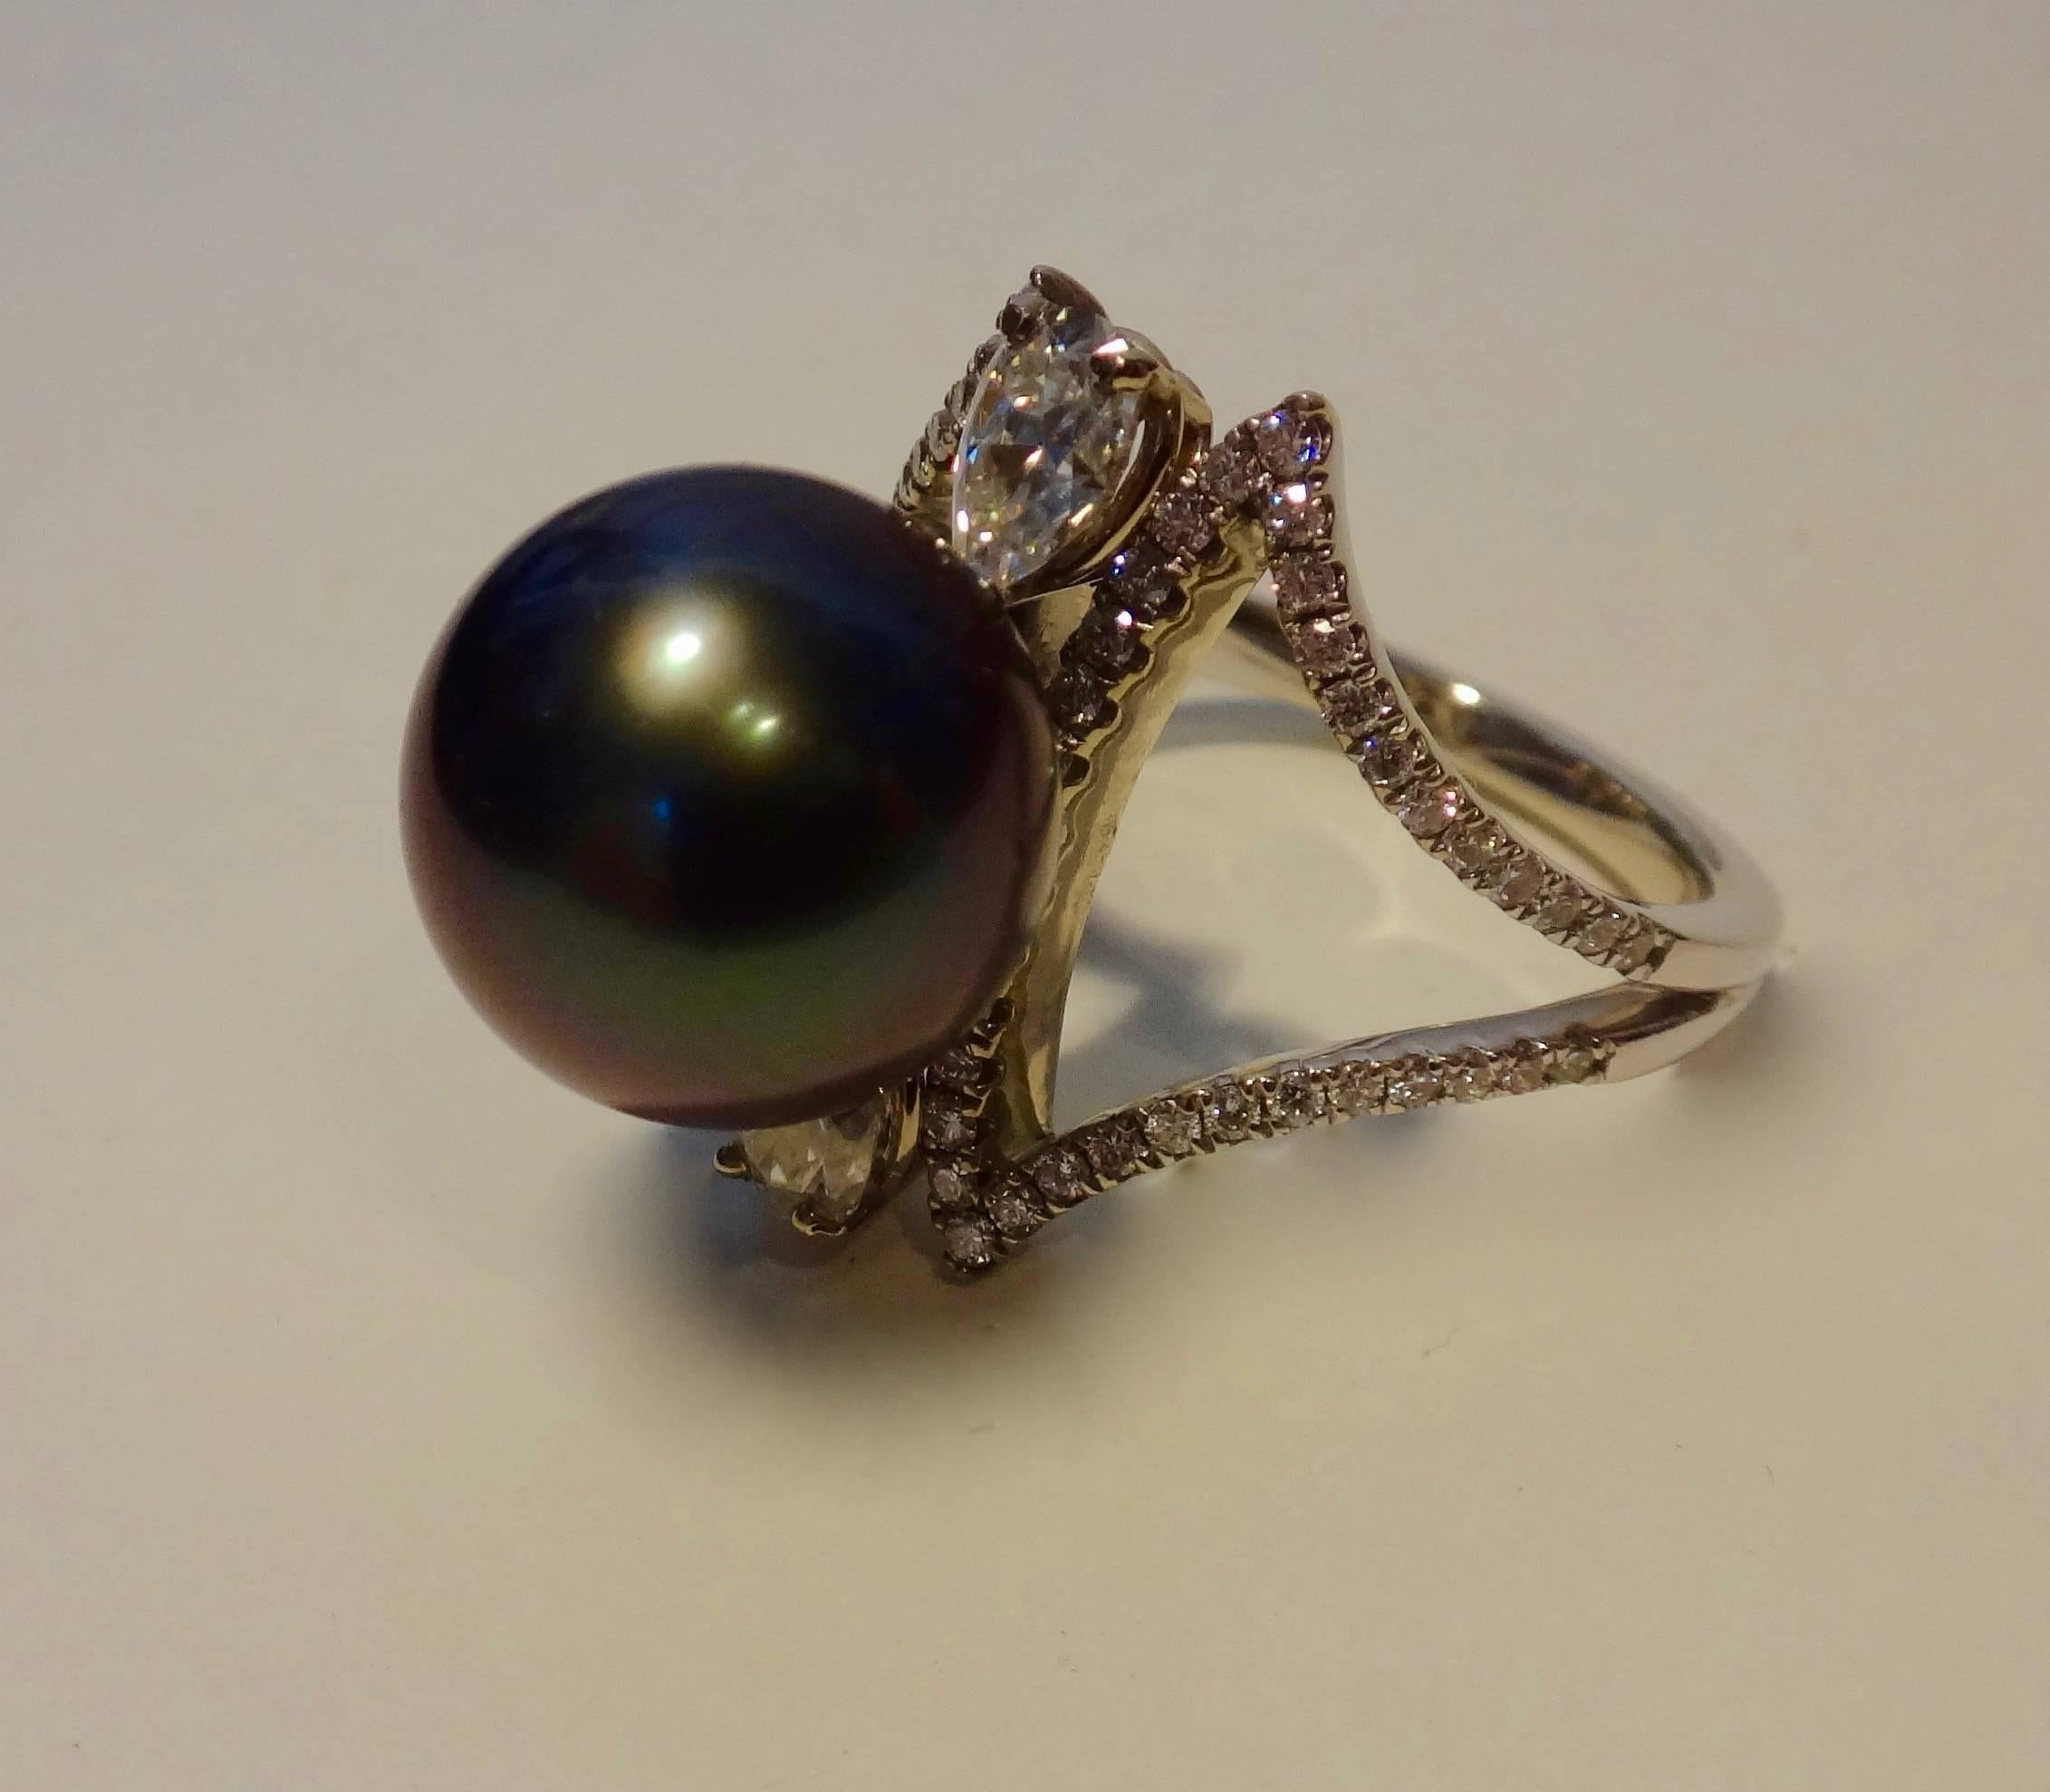 12.5mm, gem quality black Tahitian pearl with lovely pink and green highlights, is mounted in this delicate white gold ring with micro-paved diamonds and two pear shaped diamonds.  Ring size 7 1/4 and my be size up only.  